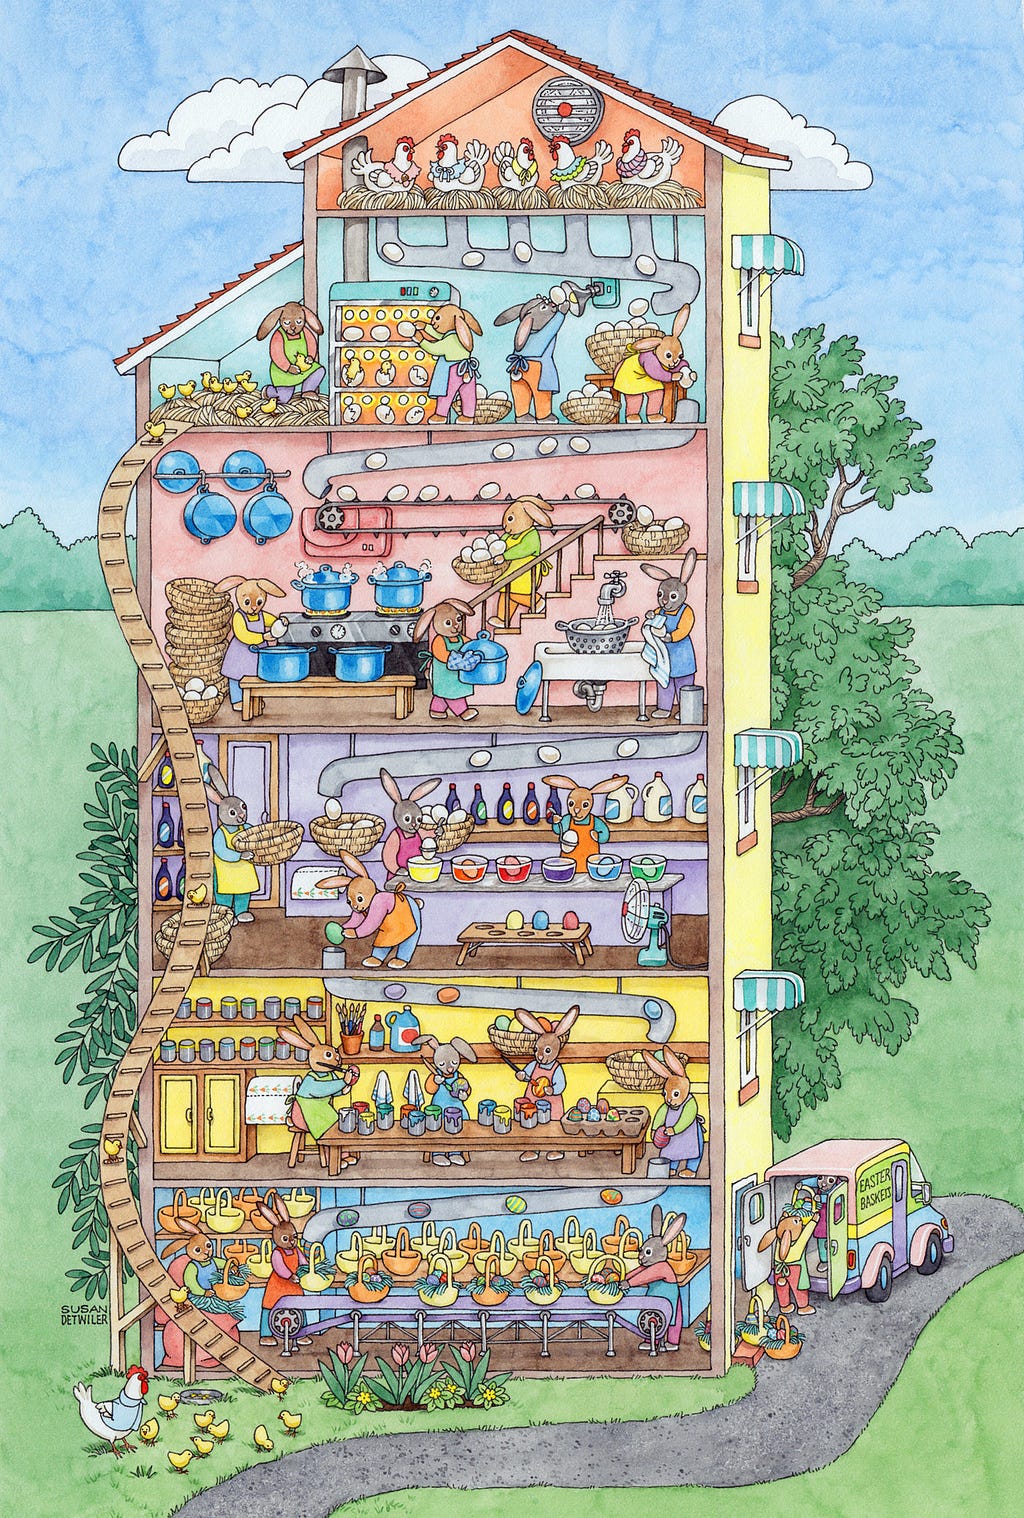 The Easter Egg Factory by Susan Detwiler